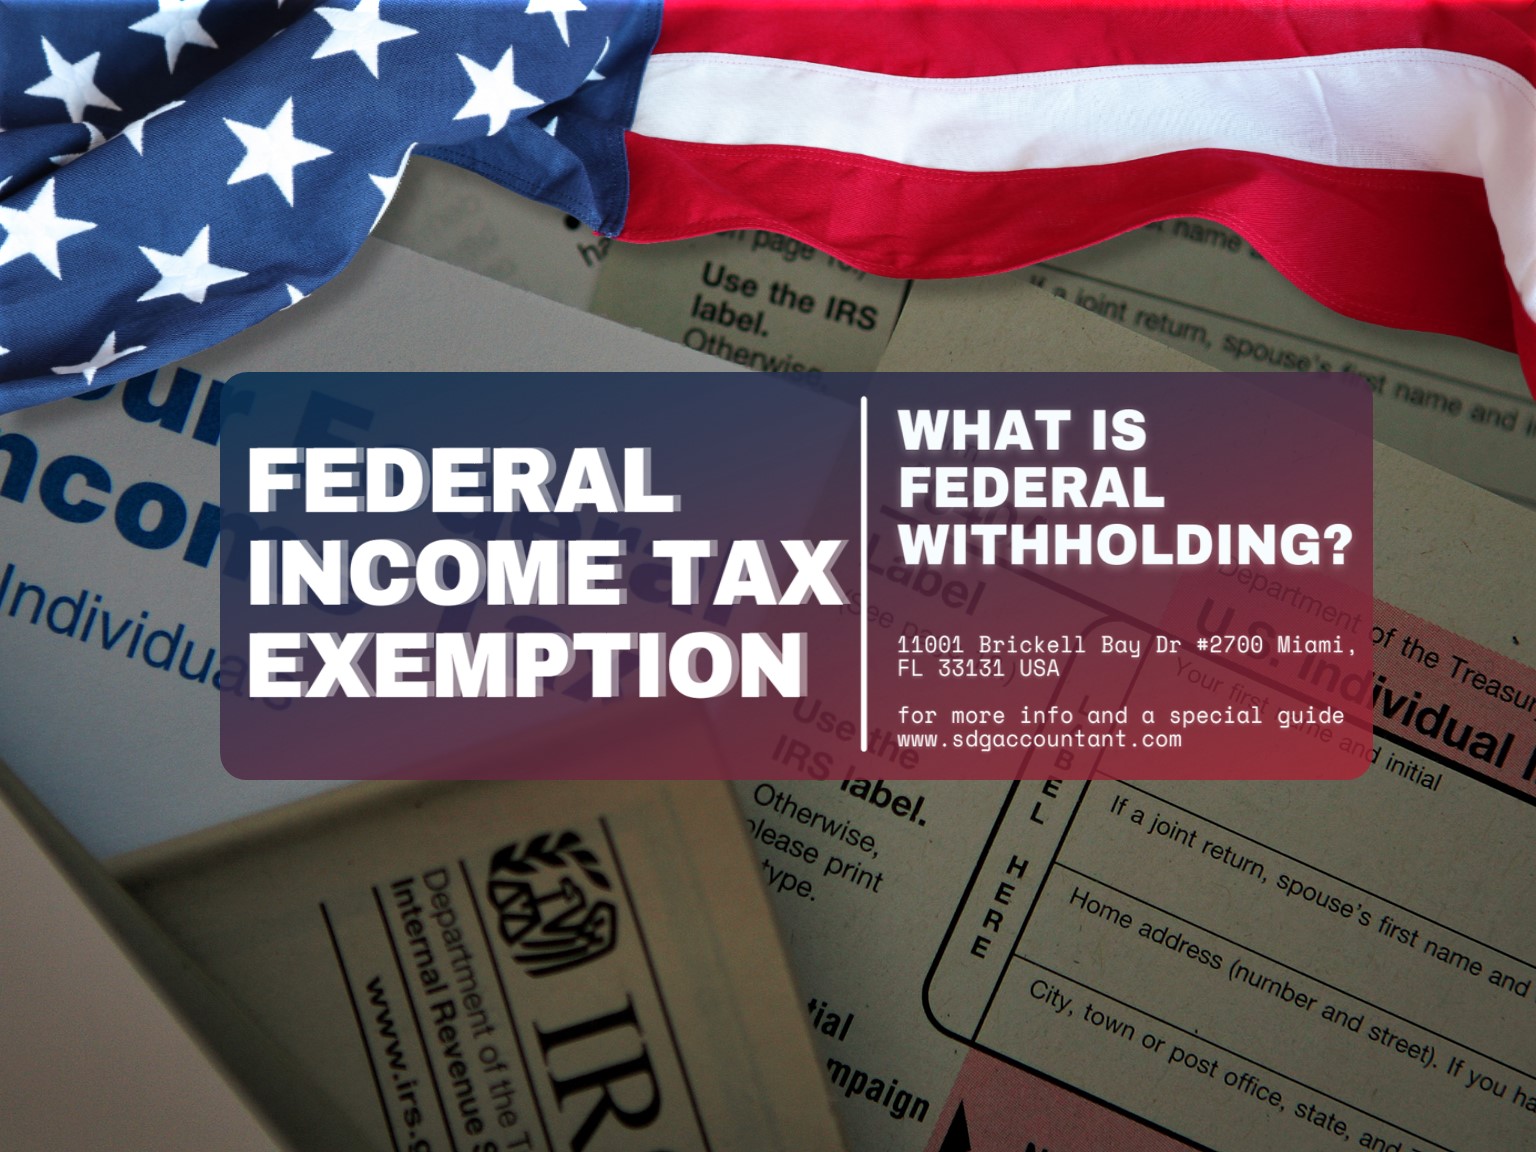 How to Know If I am Exempt from Federal Tax Withholding? SDG Accountants